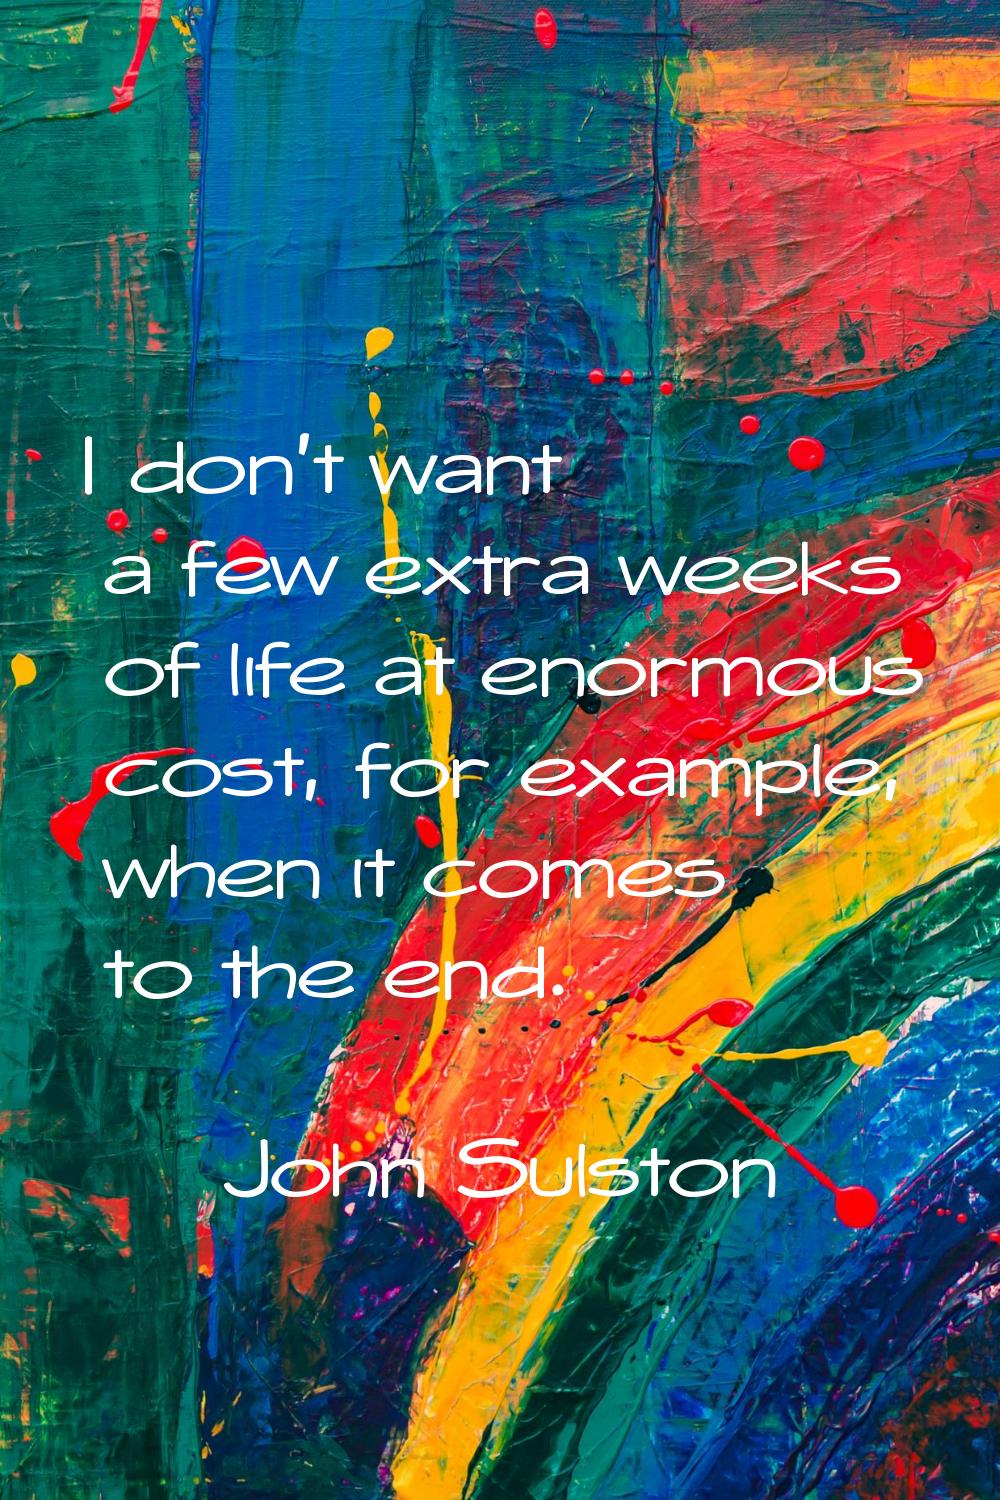 I don't want a few extra weeks of life at enormous cost, for example, when it comes to the end.